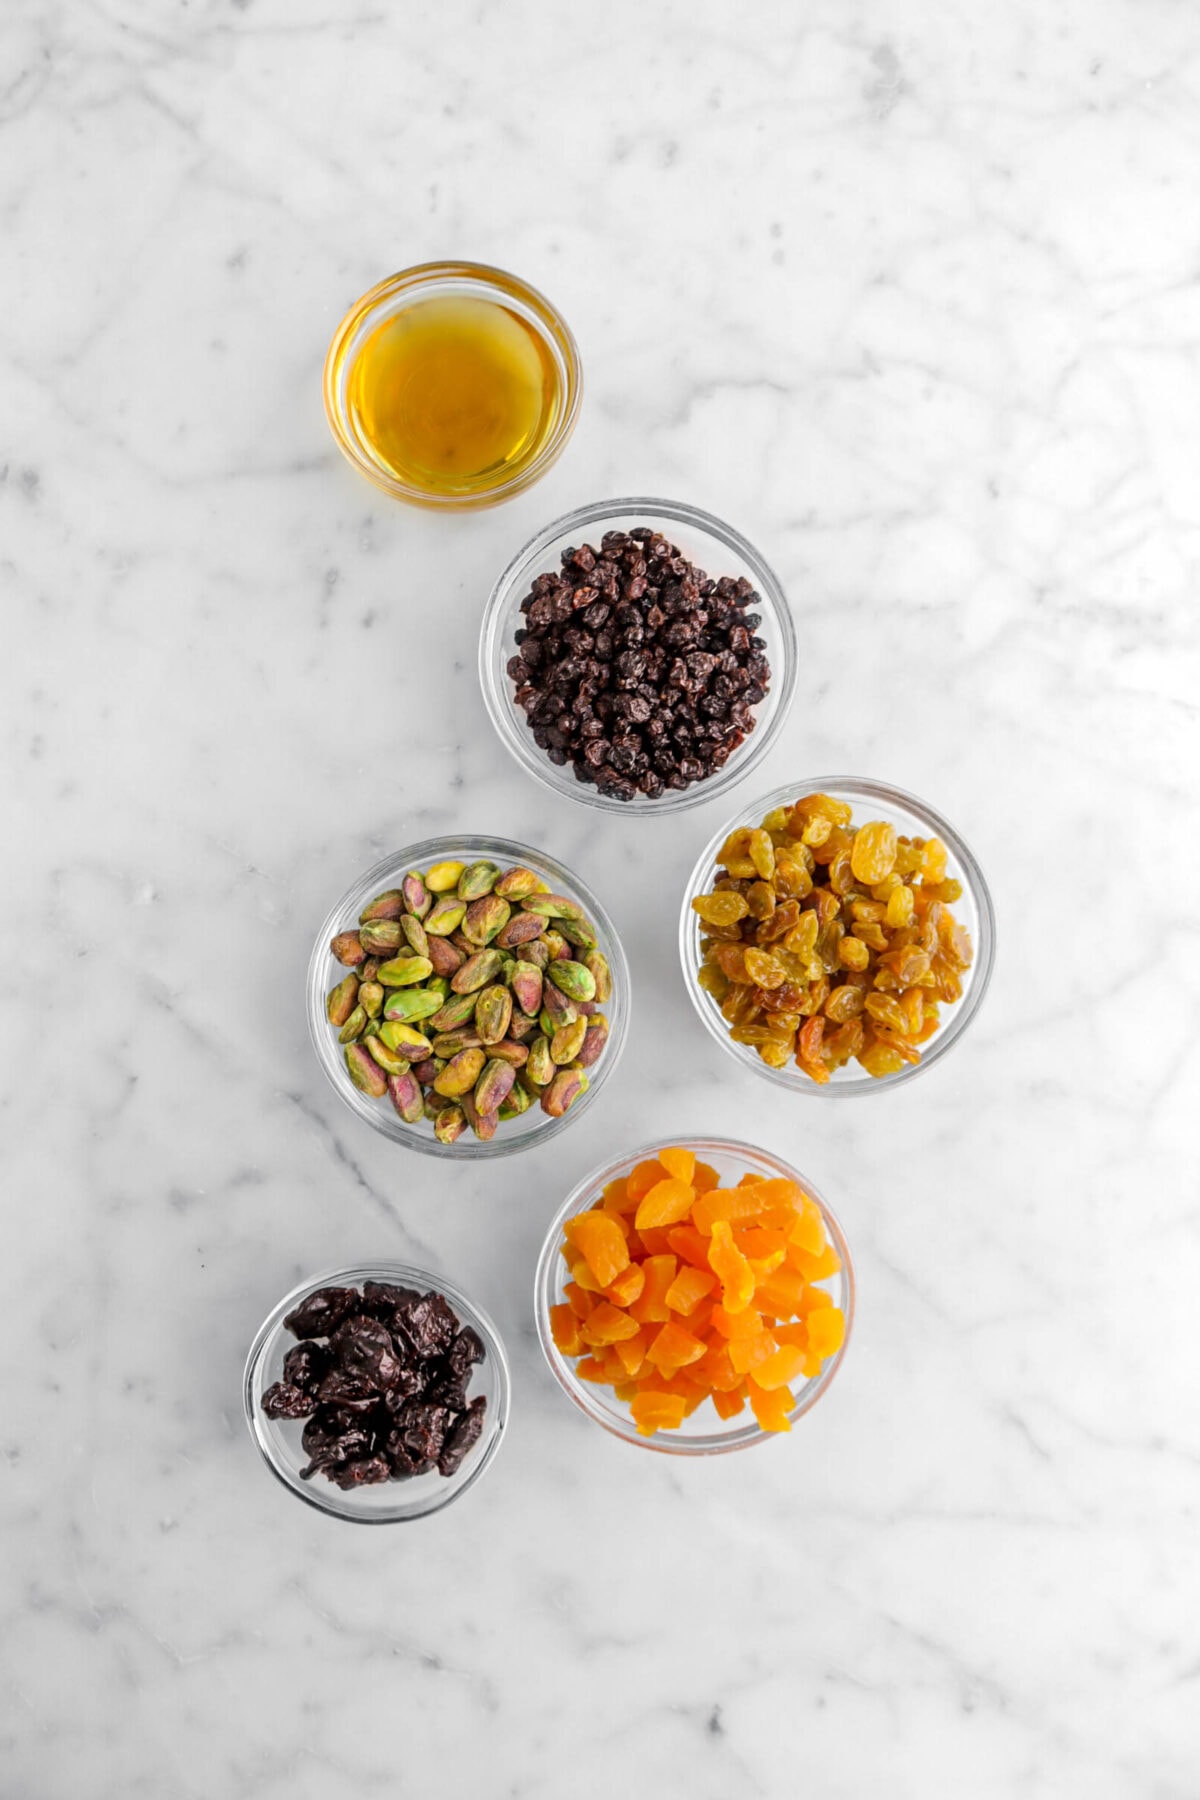 rum, dried currants, golden raisins, pistachios, dried cherries, and dried apricots on marble surface.